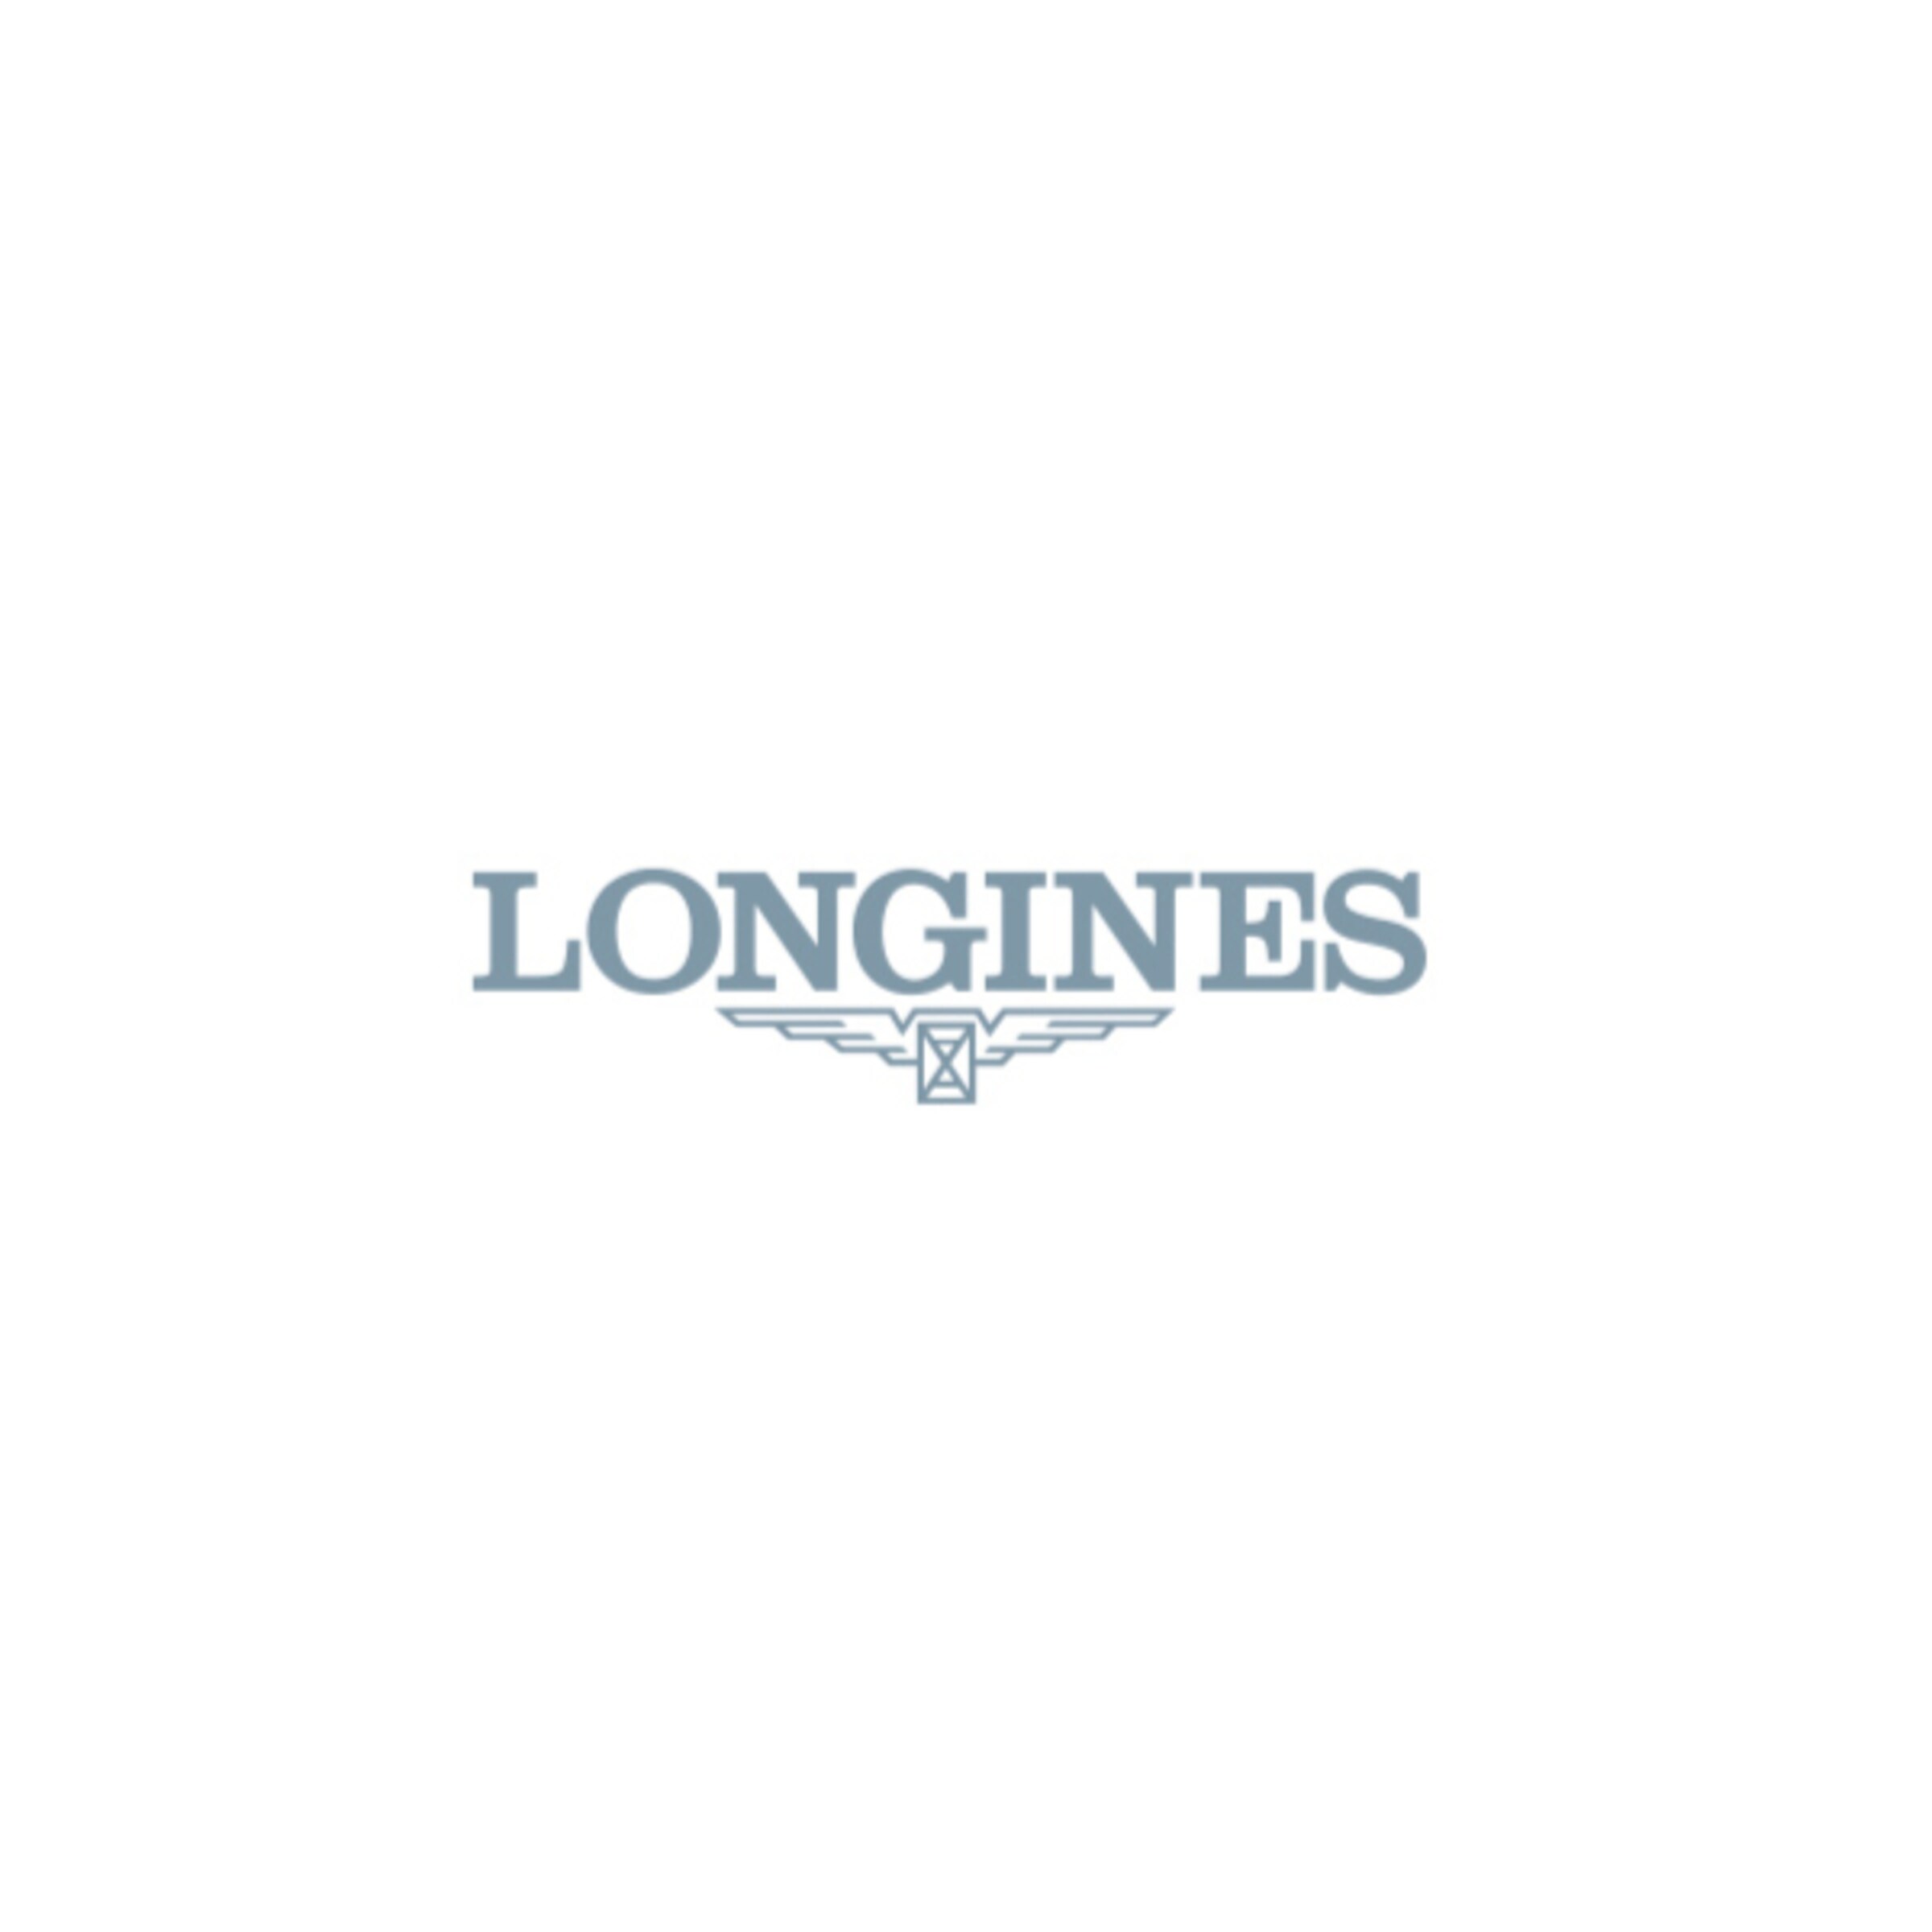 Longines THE LONGINES MASTER COLLECTION Automatic 18 karat yellow gold Watch - L2.793.6.73.2